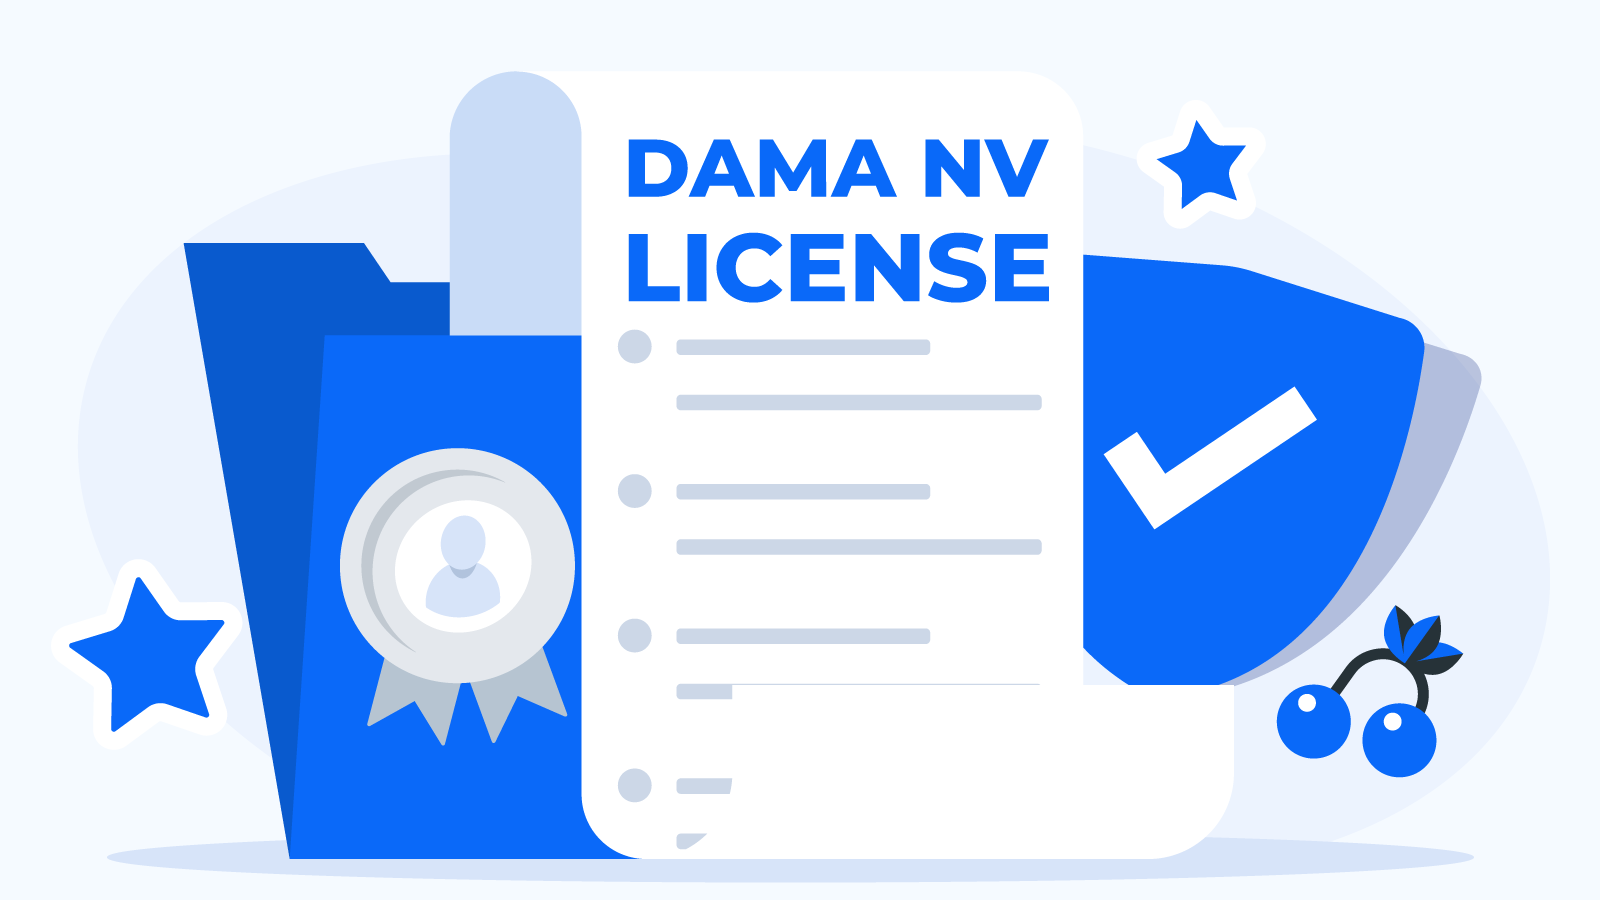 Licenses-and-Safety-Features-of-Dama-NV-Casinos